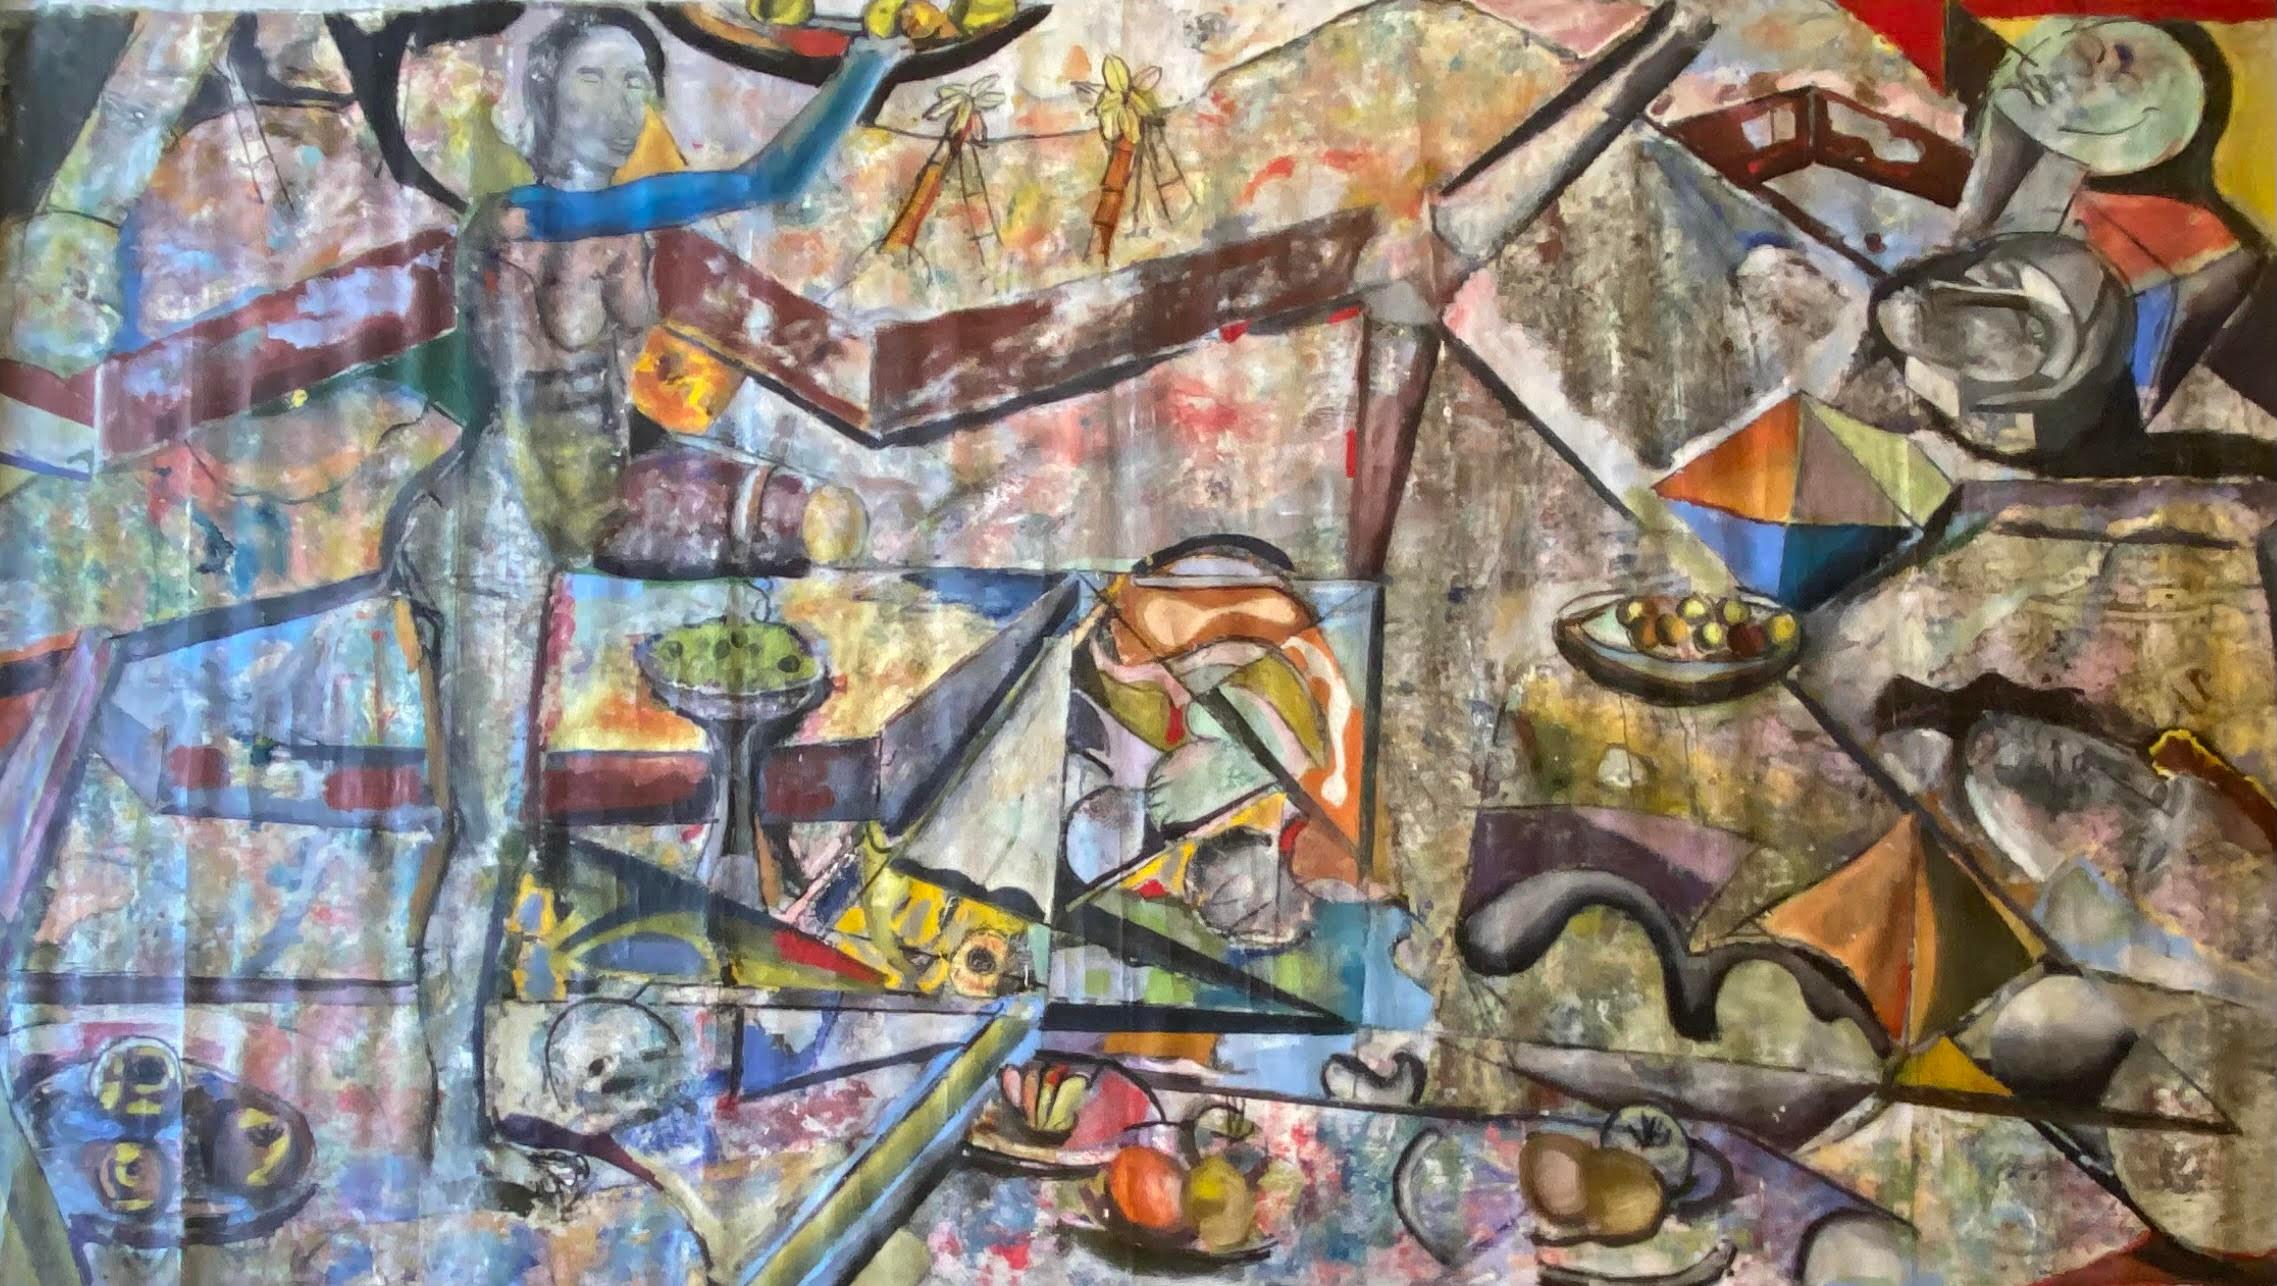 Steven H. Rehfeld Figurative Painting - 'The Feast’  - Very Large Original Contemporary Abstract Mixed Media Painting 